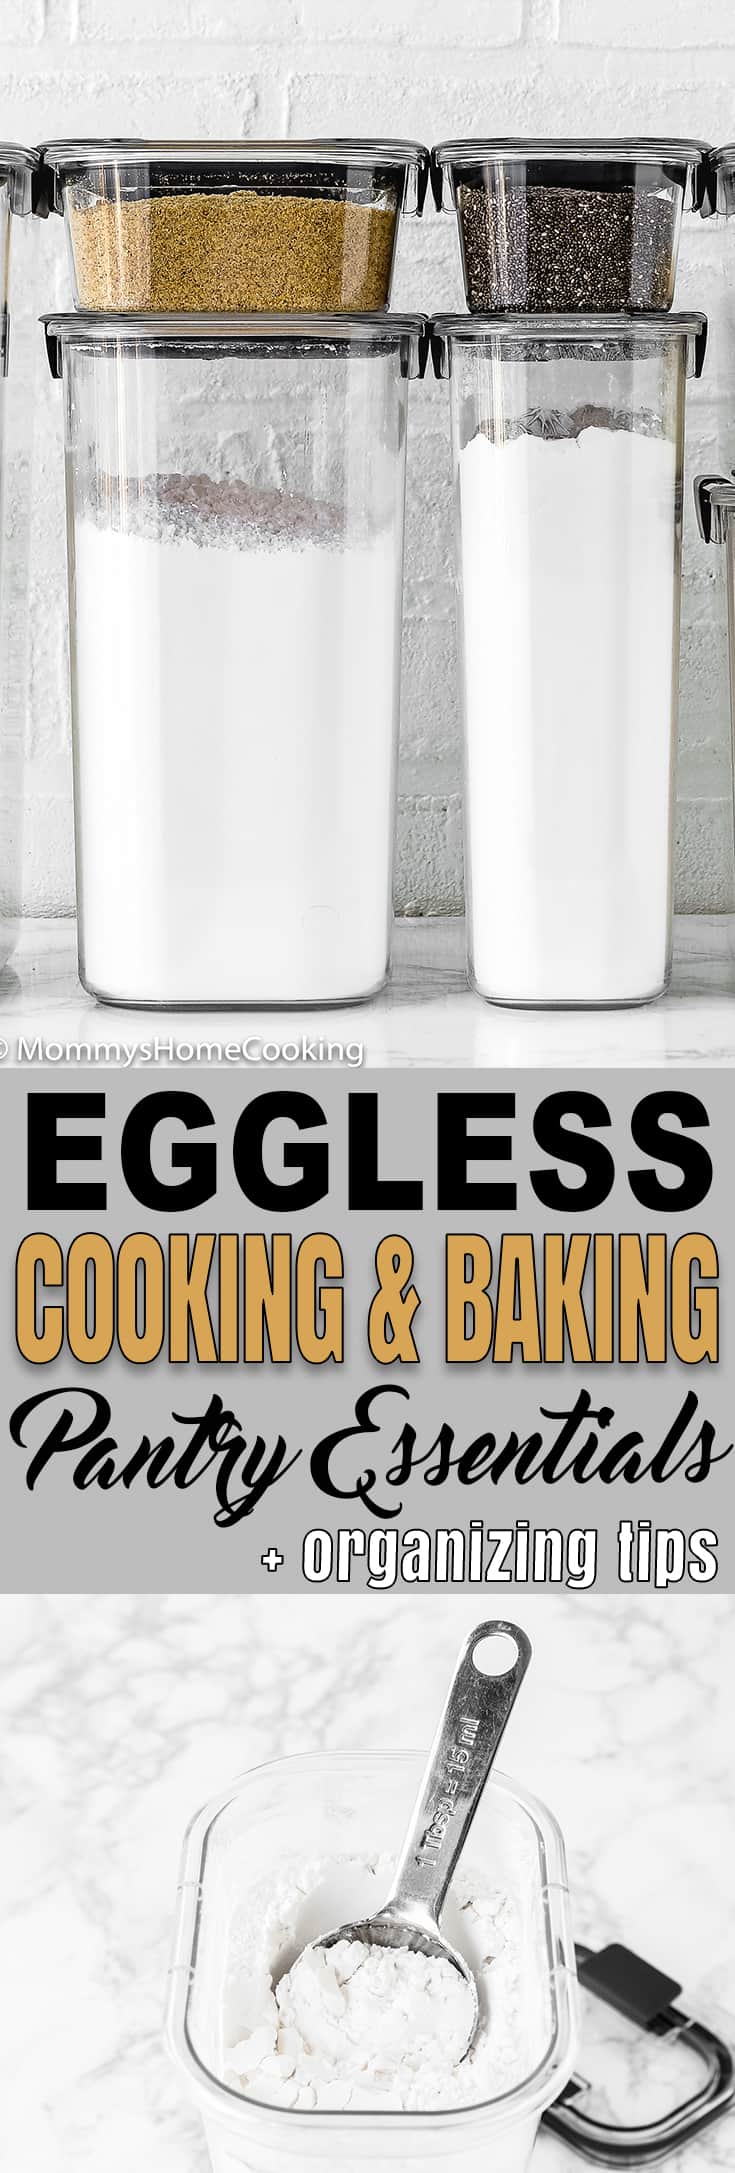 container with my fave eggless cooking and baking pantry essentials